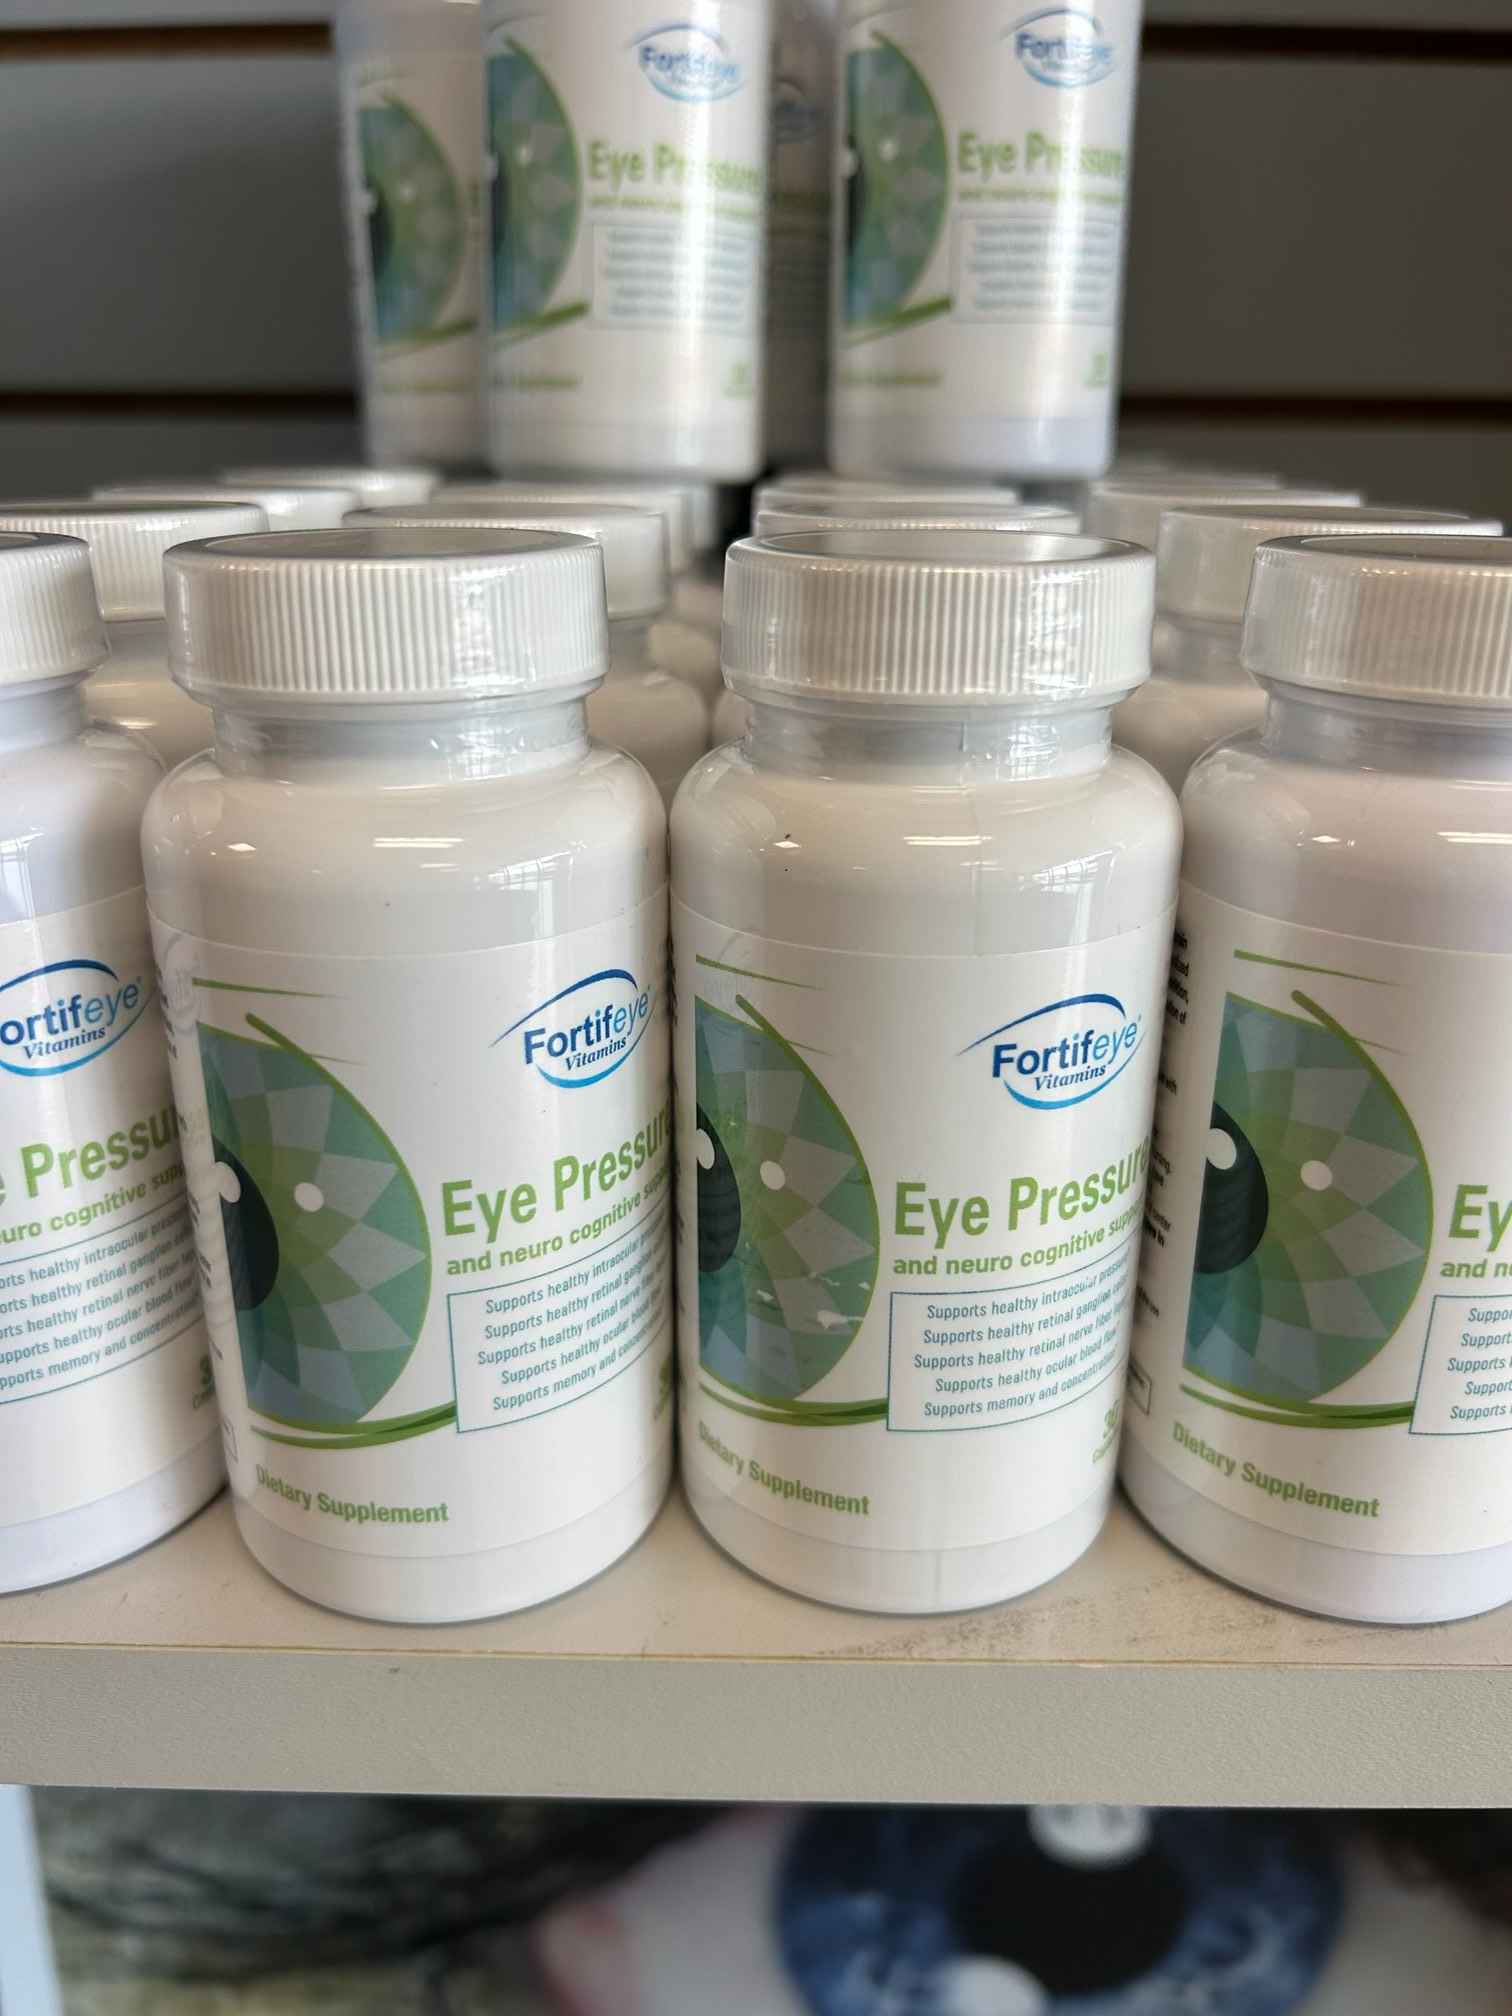 The all new Fortifeye eye pressure and neuro-cognitive support supplement discussed in detail, and much more!